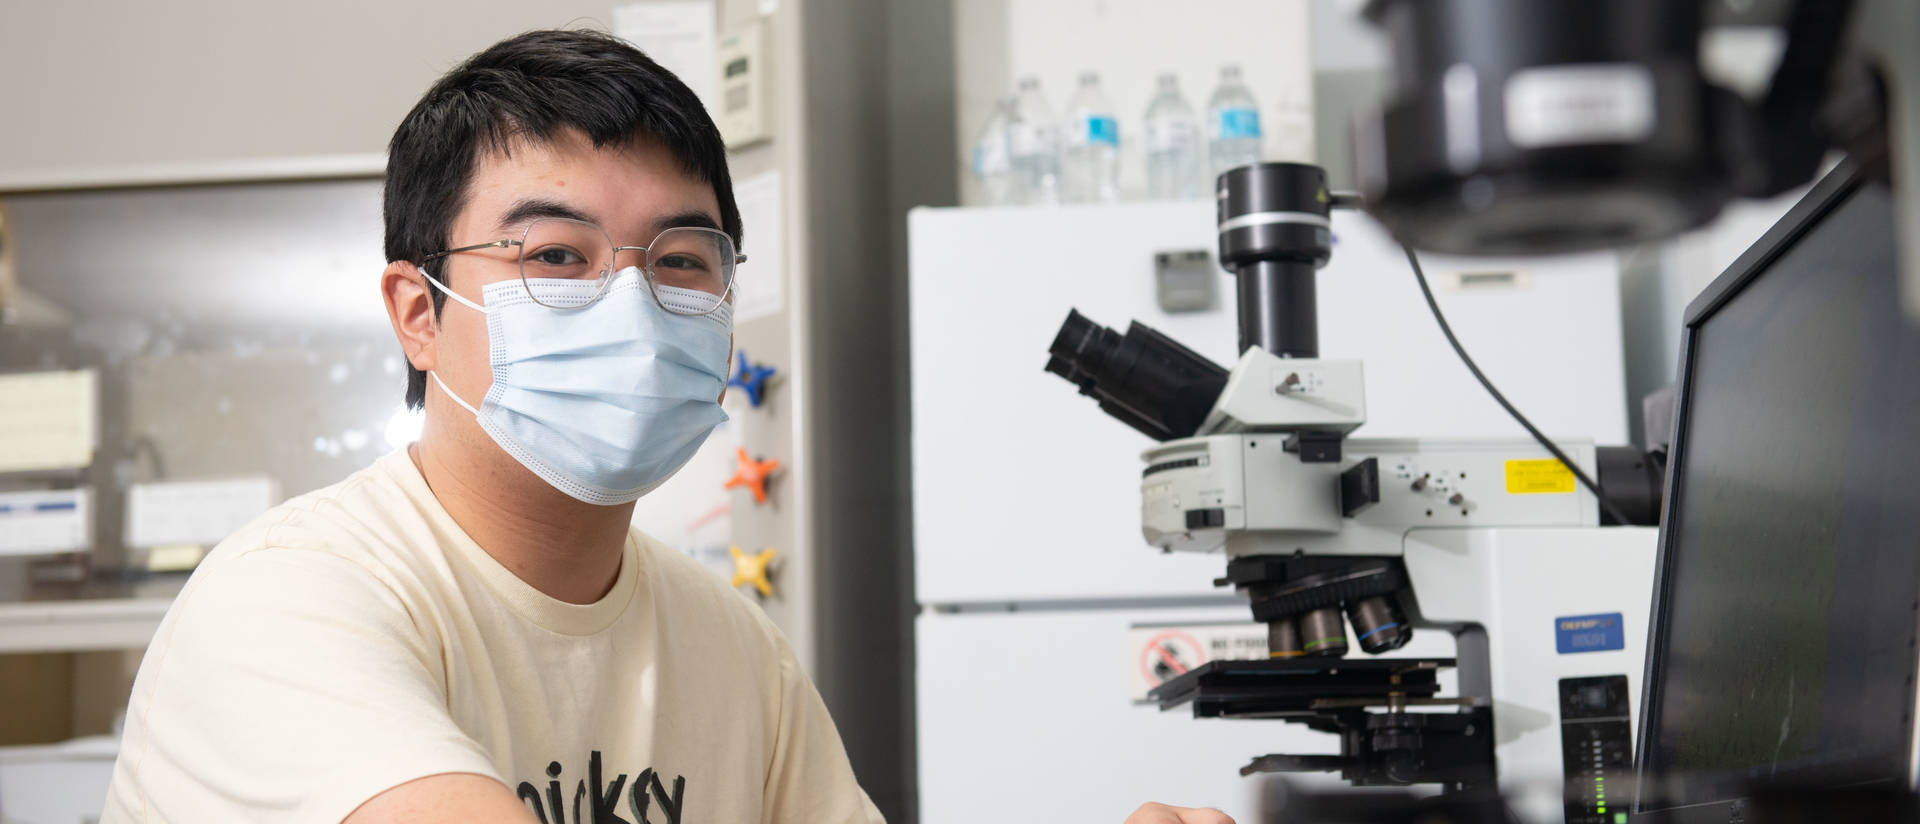 Materials science and engineering student works with a microscope in a lab on campus